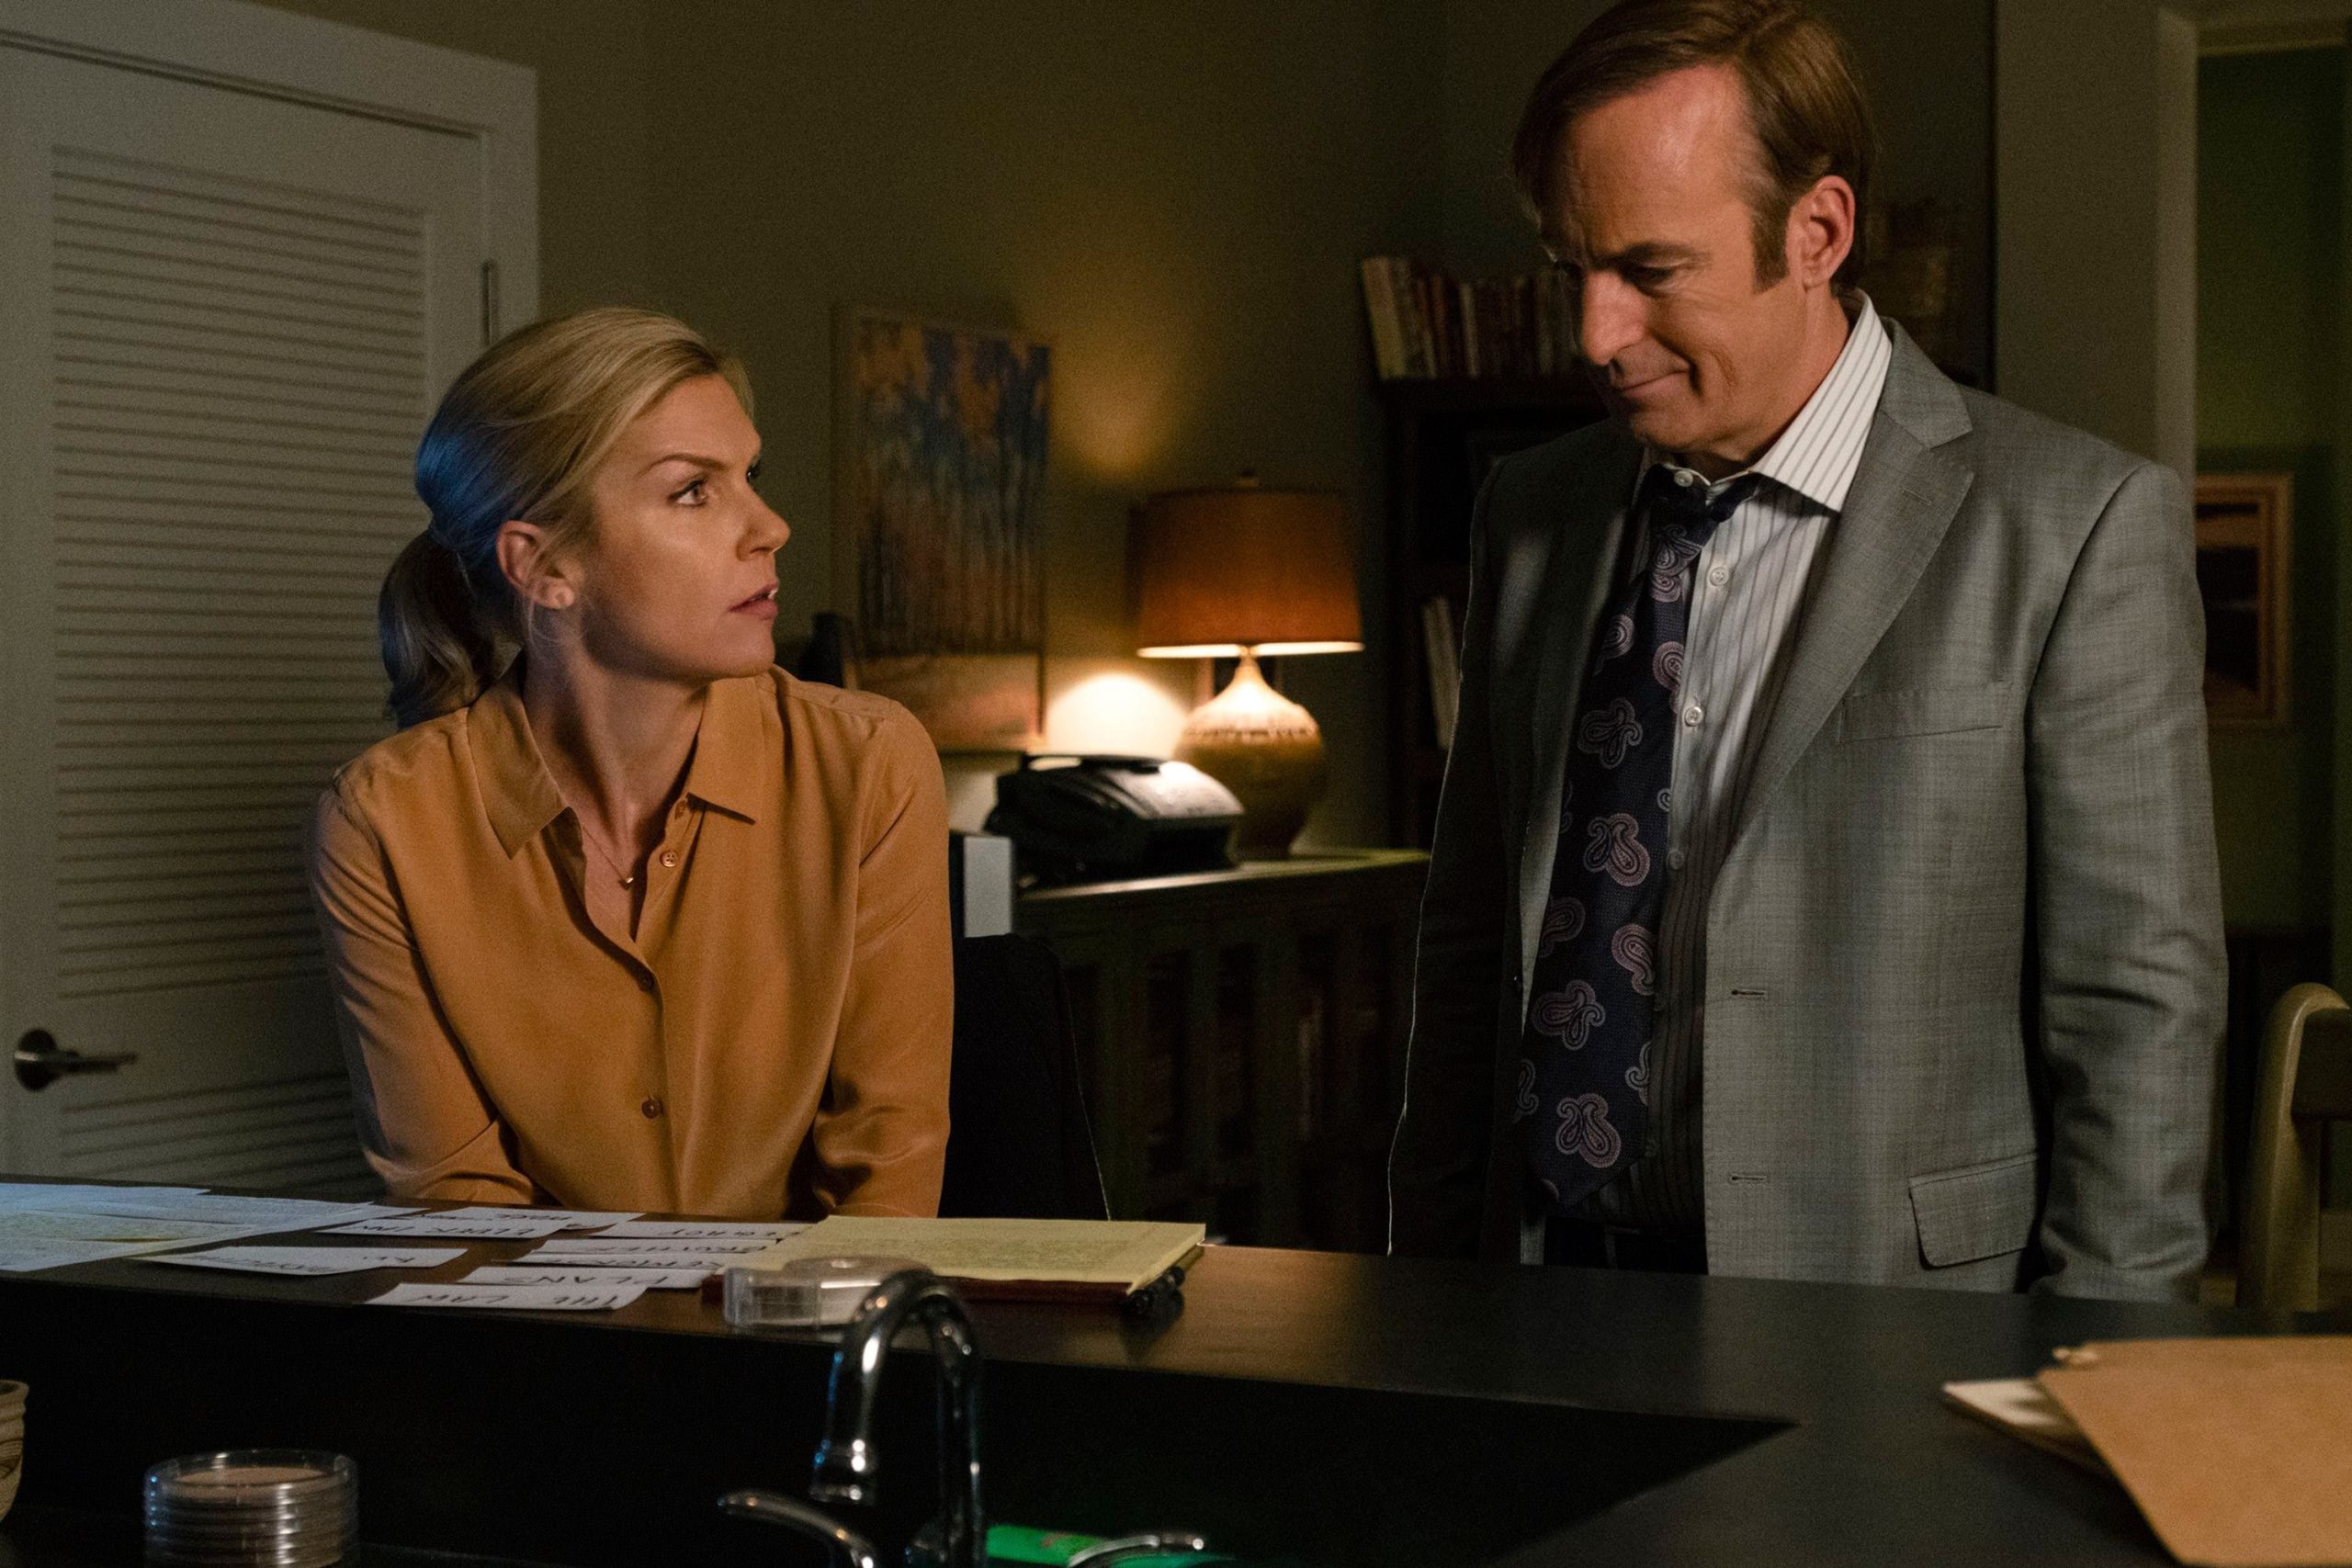 “s’all good, man! ” as ‘better call saul’ wraps up its fourth season